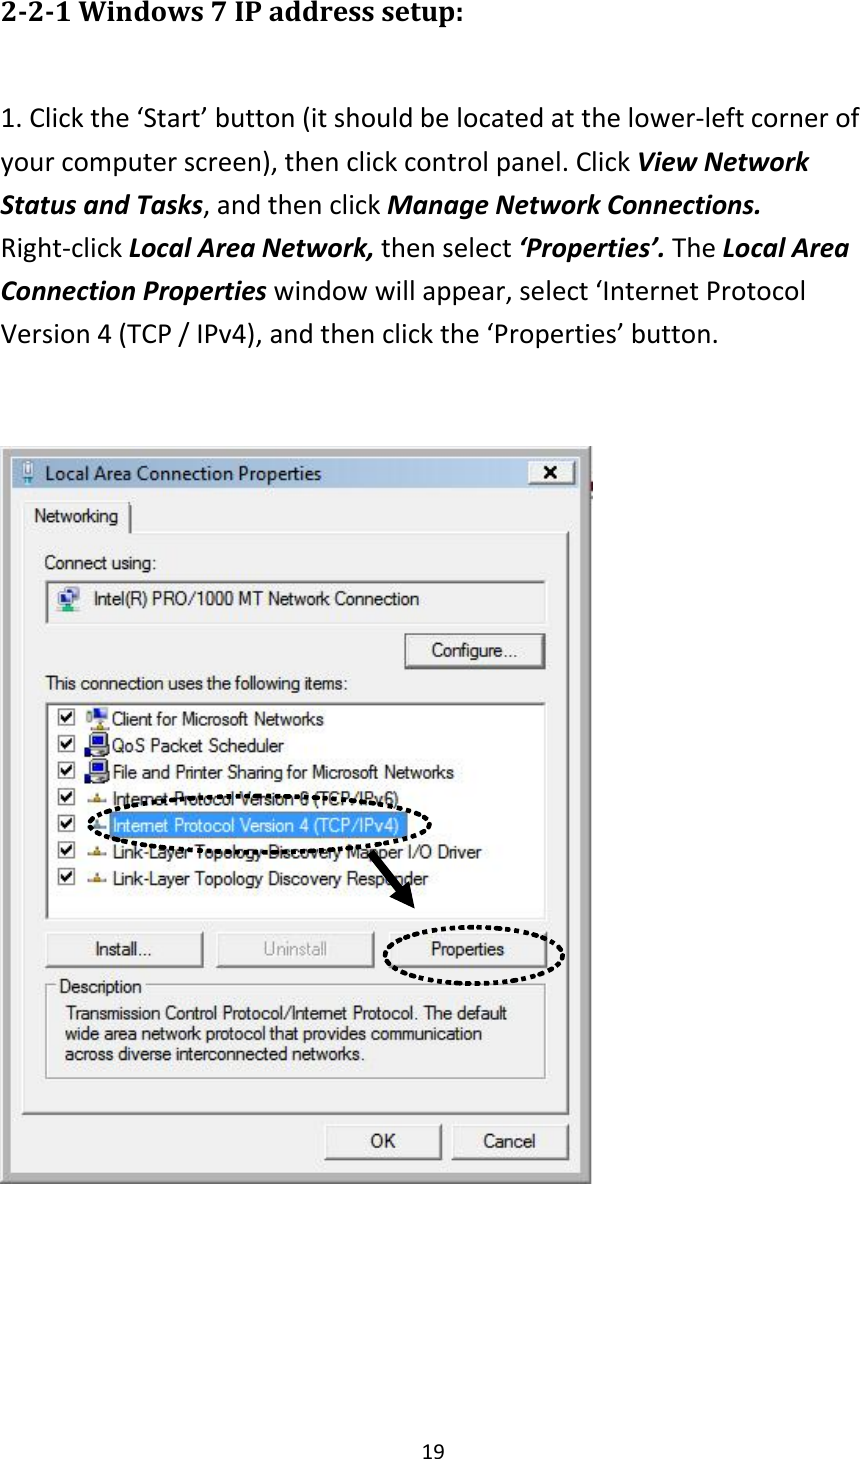 19 2-2-1 Windows 7 IP address setup:  1. Click the ‘Start’ button (it should be located at the lower-left corner of your computer screen), then click control panel. Click View Network Status and Tasks, and then click Manage Network Connections. Right-click Local Area Network, then select ‘Properties’. The Local Area Connection Properties window will appear, select ‘Internet Protocol Version 4 (TCP / IPv4), and then click the ‘Properties’ button.      